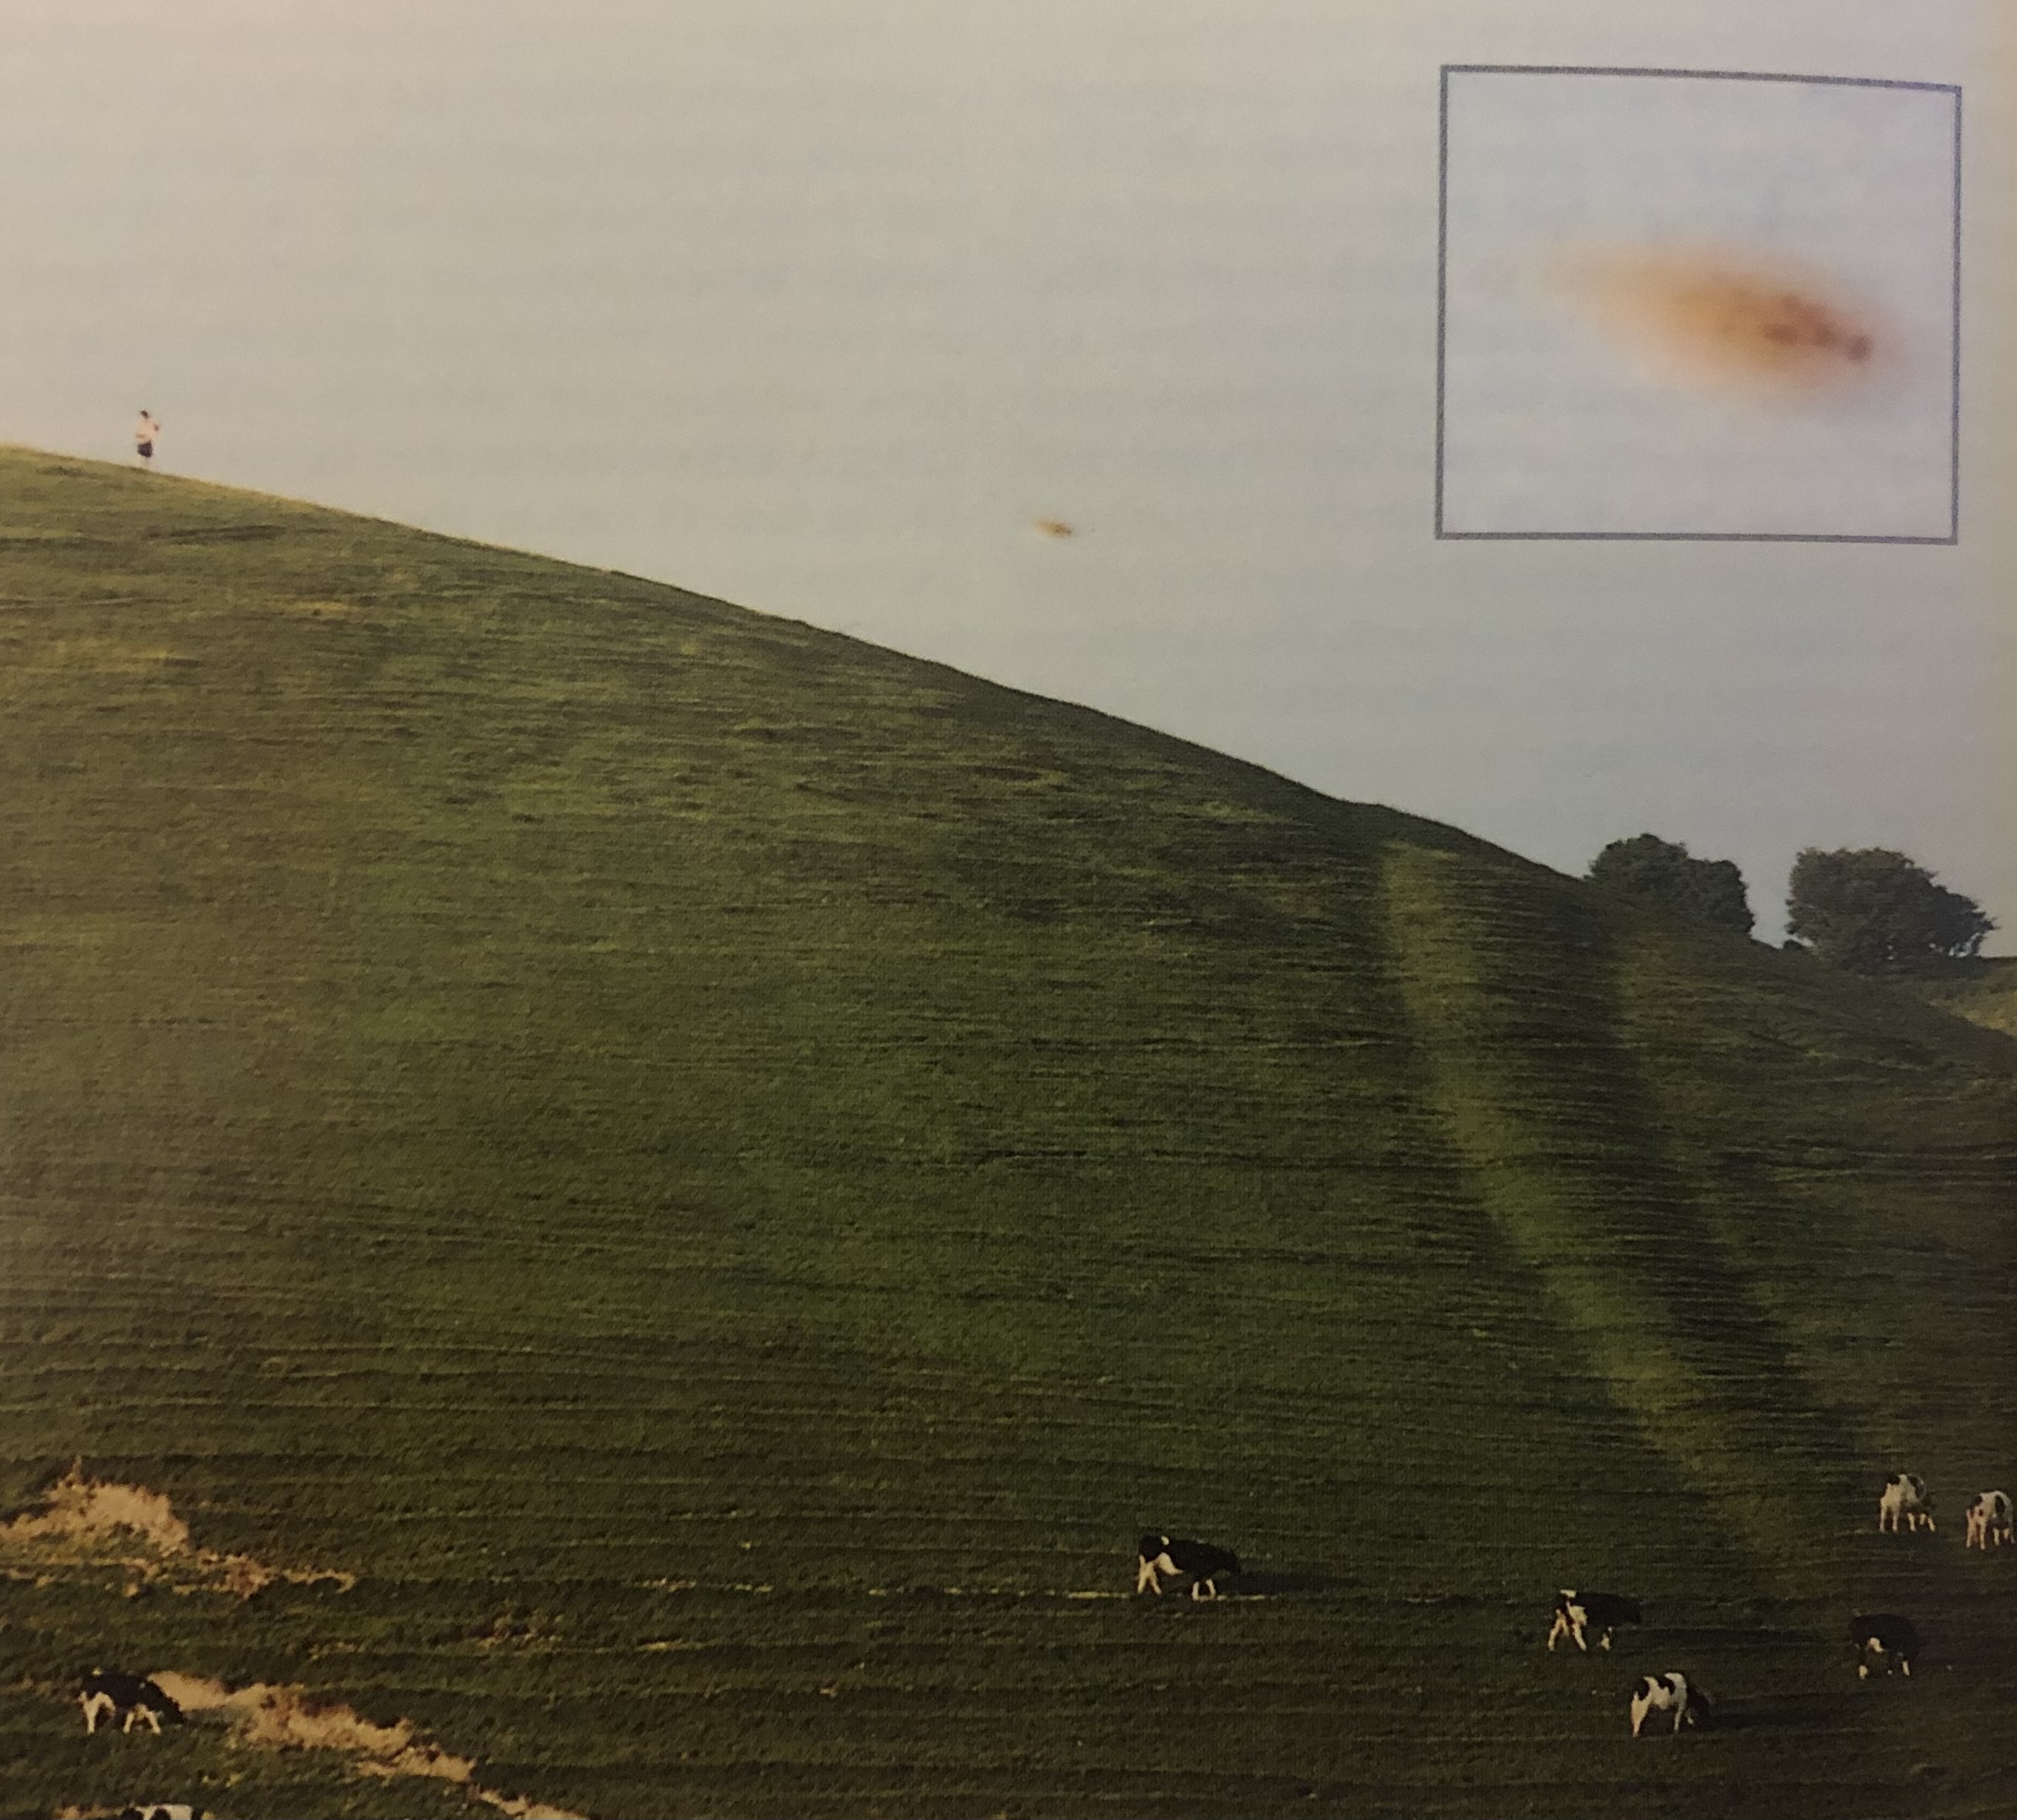 A color photograph where a bright green hill curves diagonally from the top left corner of the frame to the middle right. Cows dot the hill in the bottom right of the frame. In the blue sky taking up the top third of the frame, an orange blurry cloud with a cluster of dark orange spots can be seen framed with a black square to highlight it.